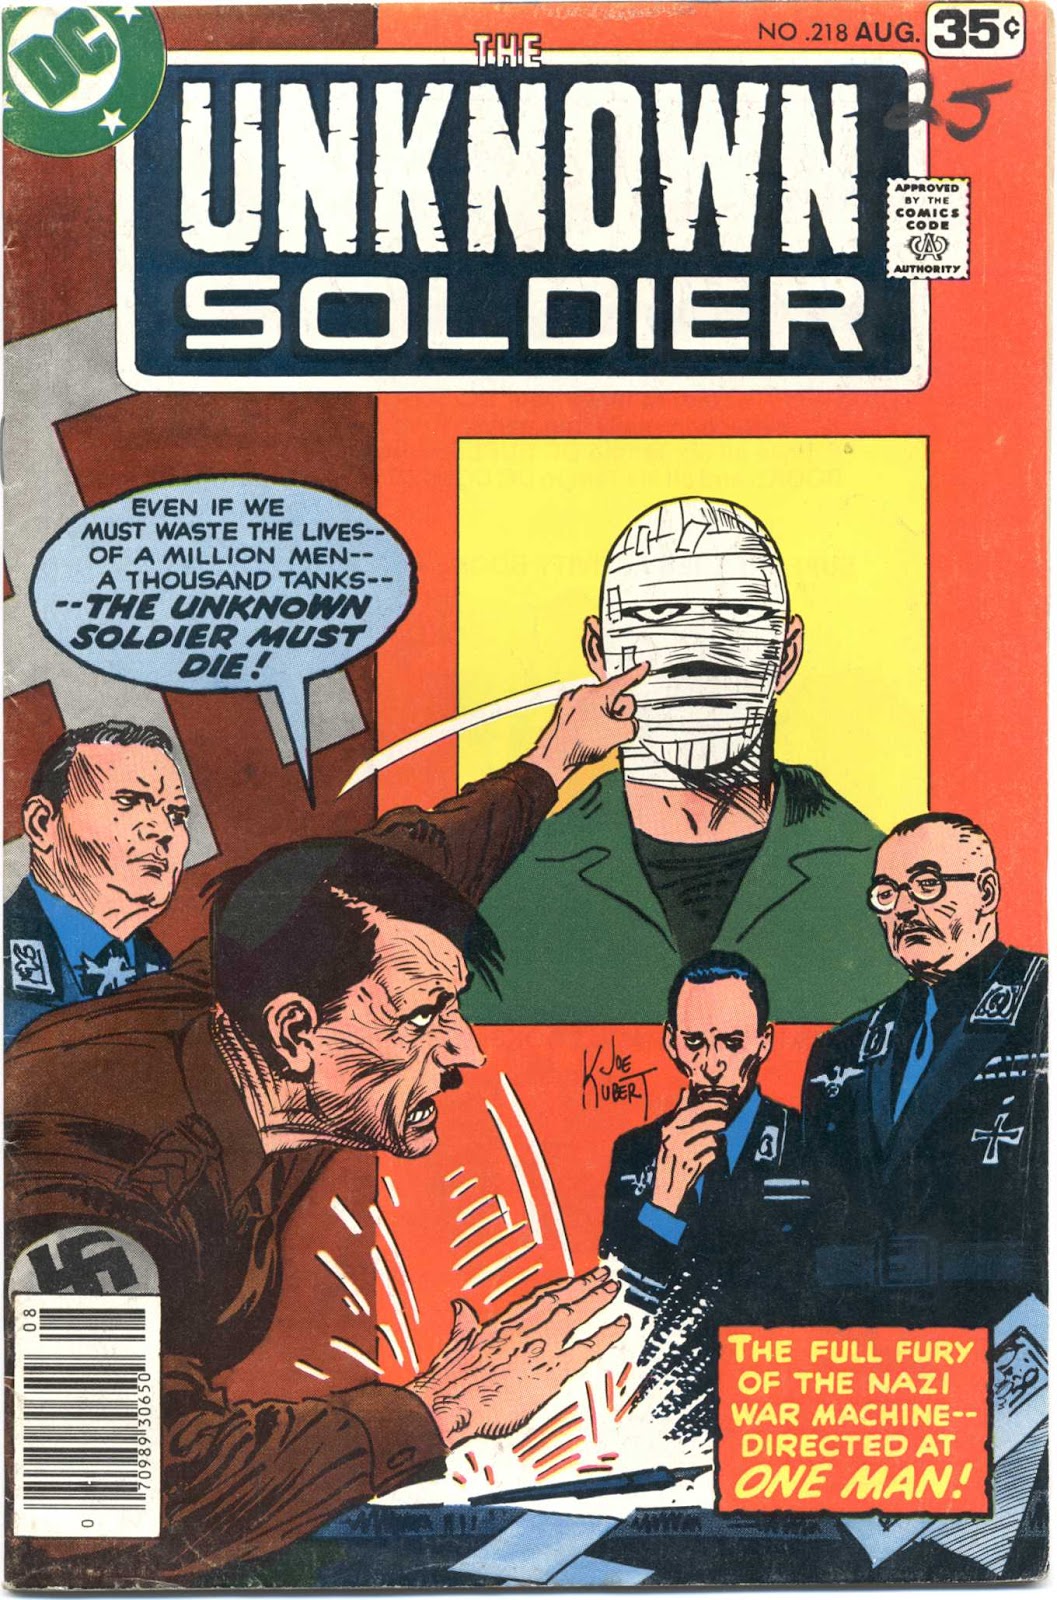 Unknown Soldier (1977) Issue #218 #14 - English 1